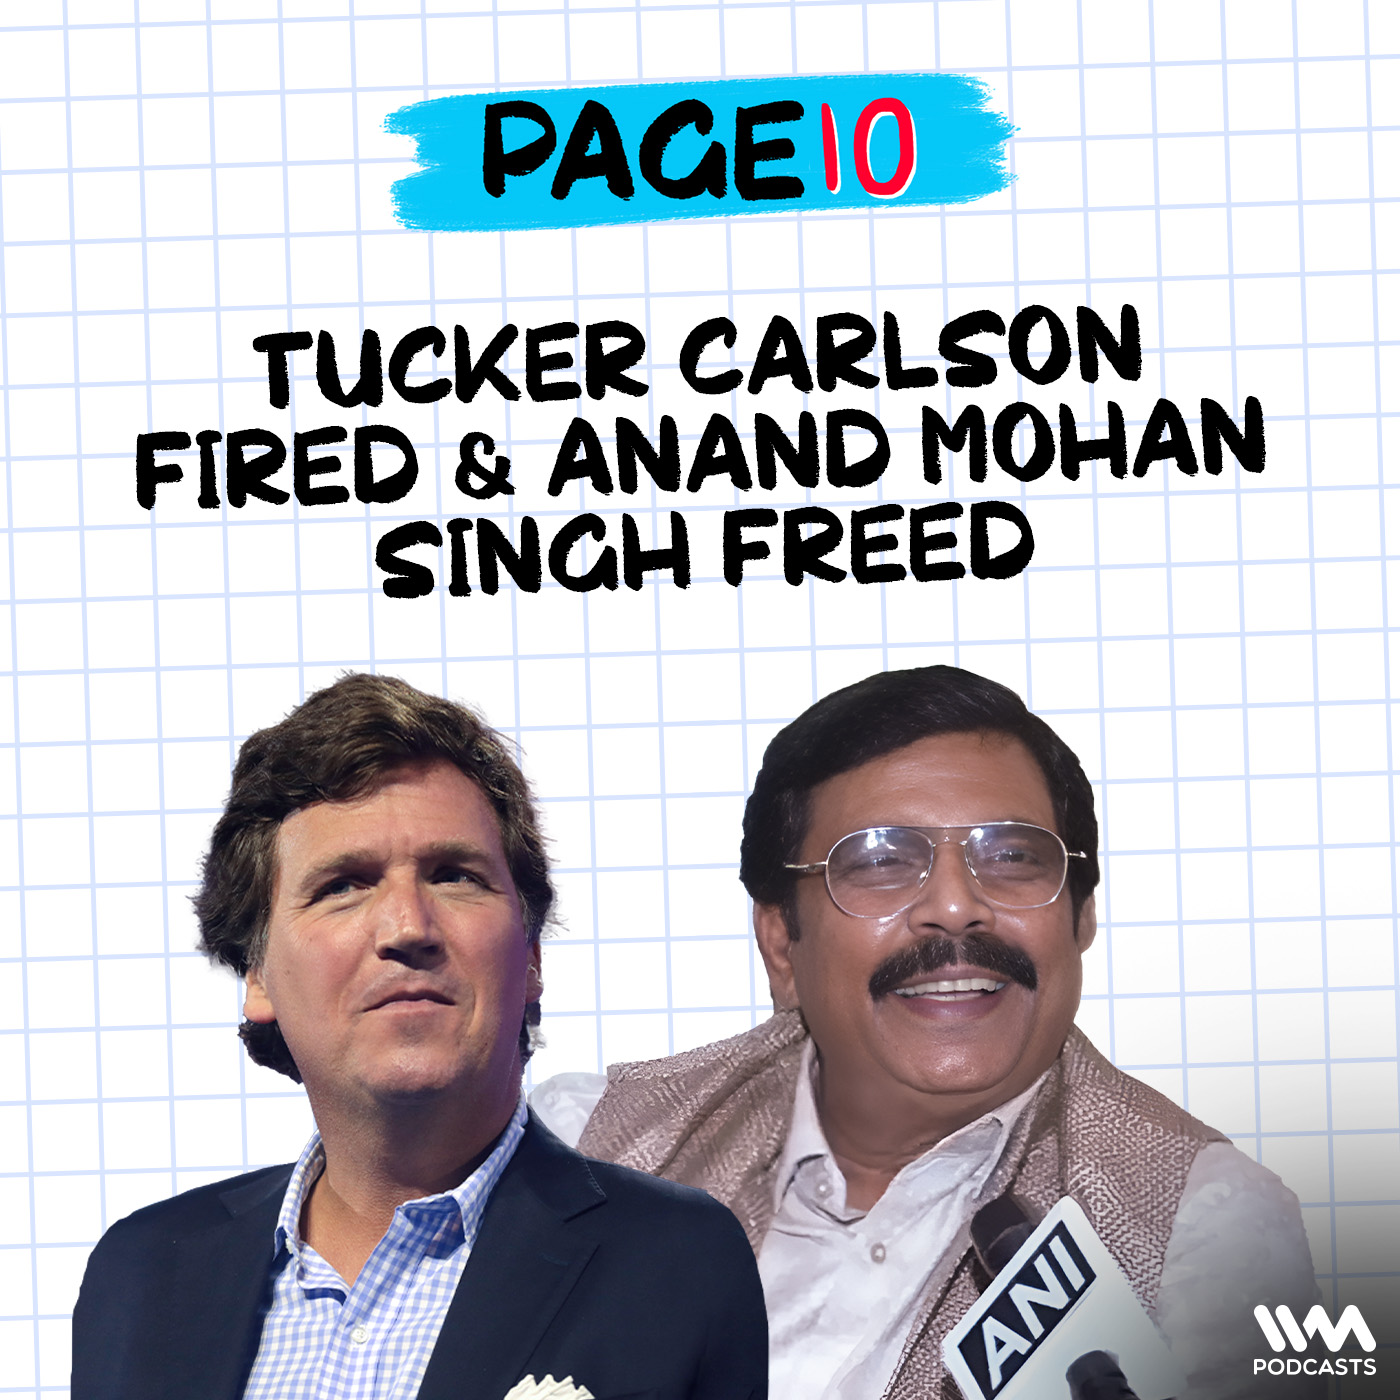 Page 10 : Tucker Carlson Fired, Anand Mohan Singh Freed & Journalism in India